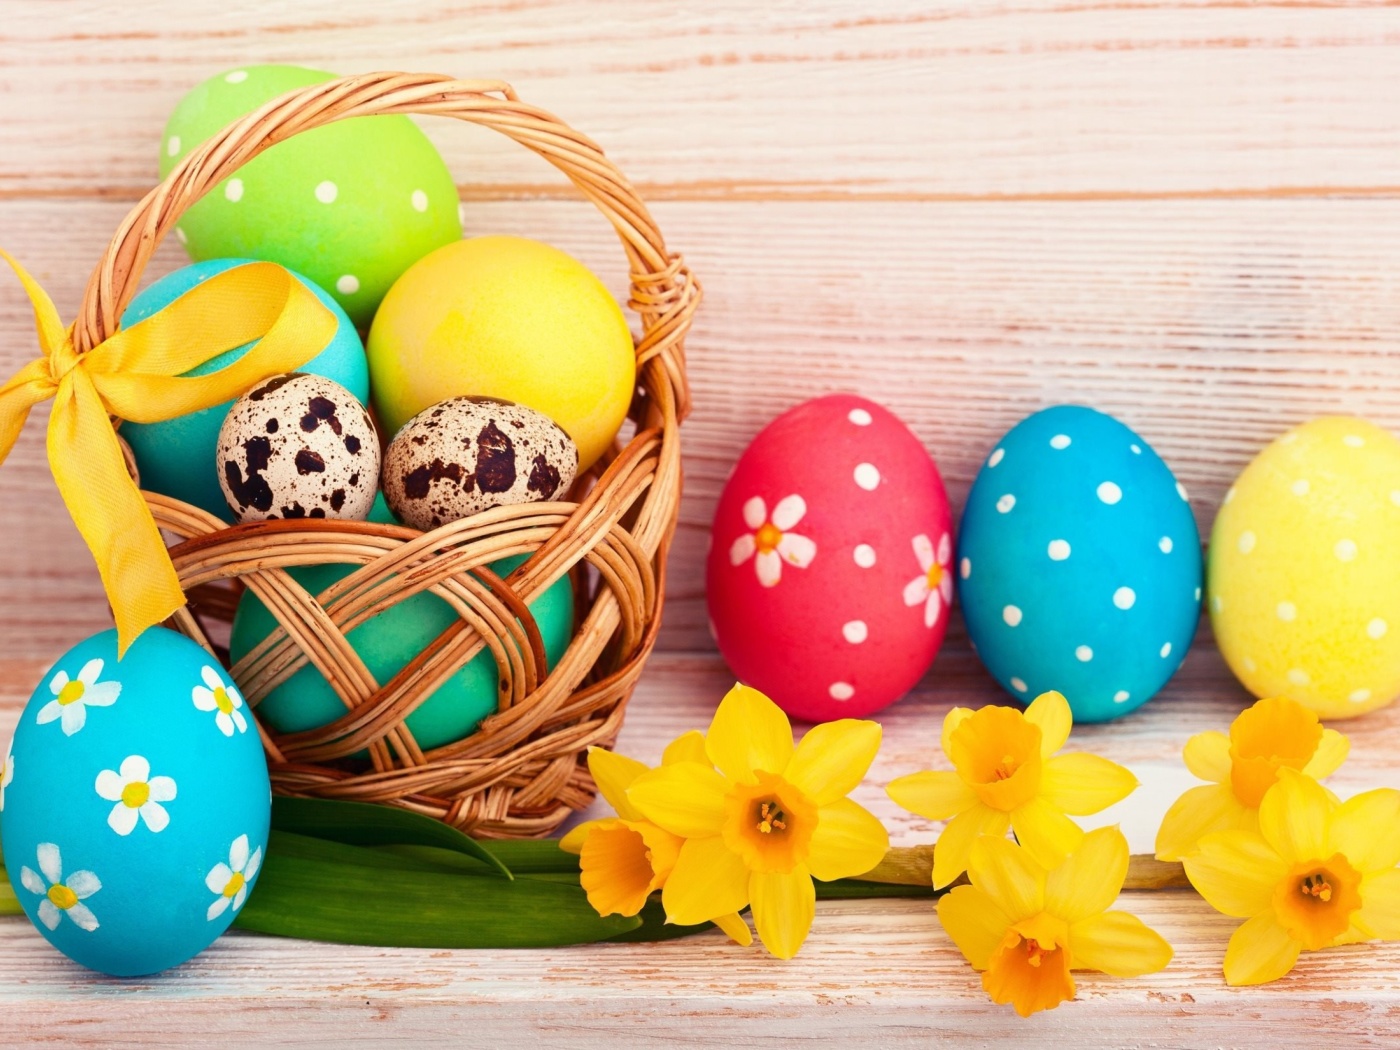 Easter Spring Daffodils Flowers and Eggs Decorations wallpaper 1400x1050